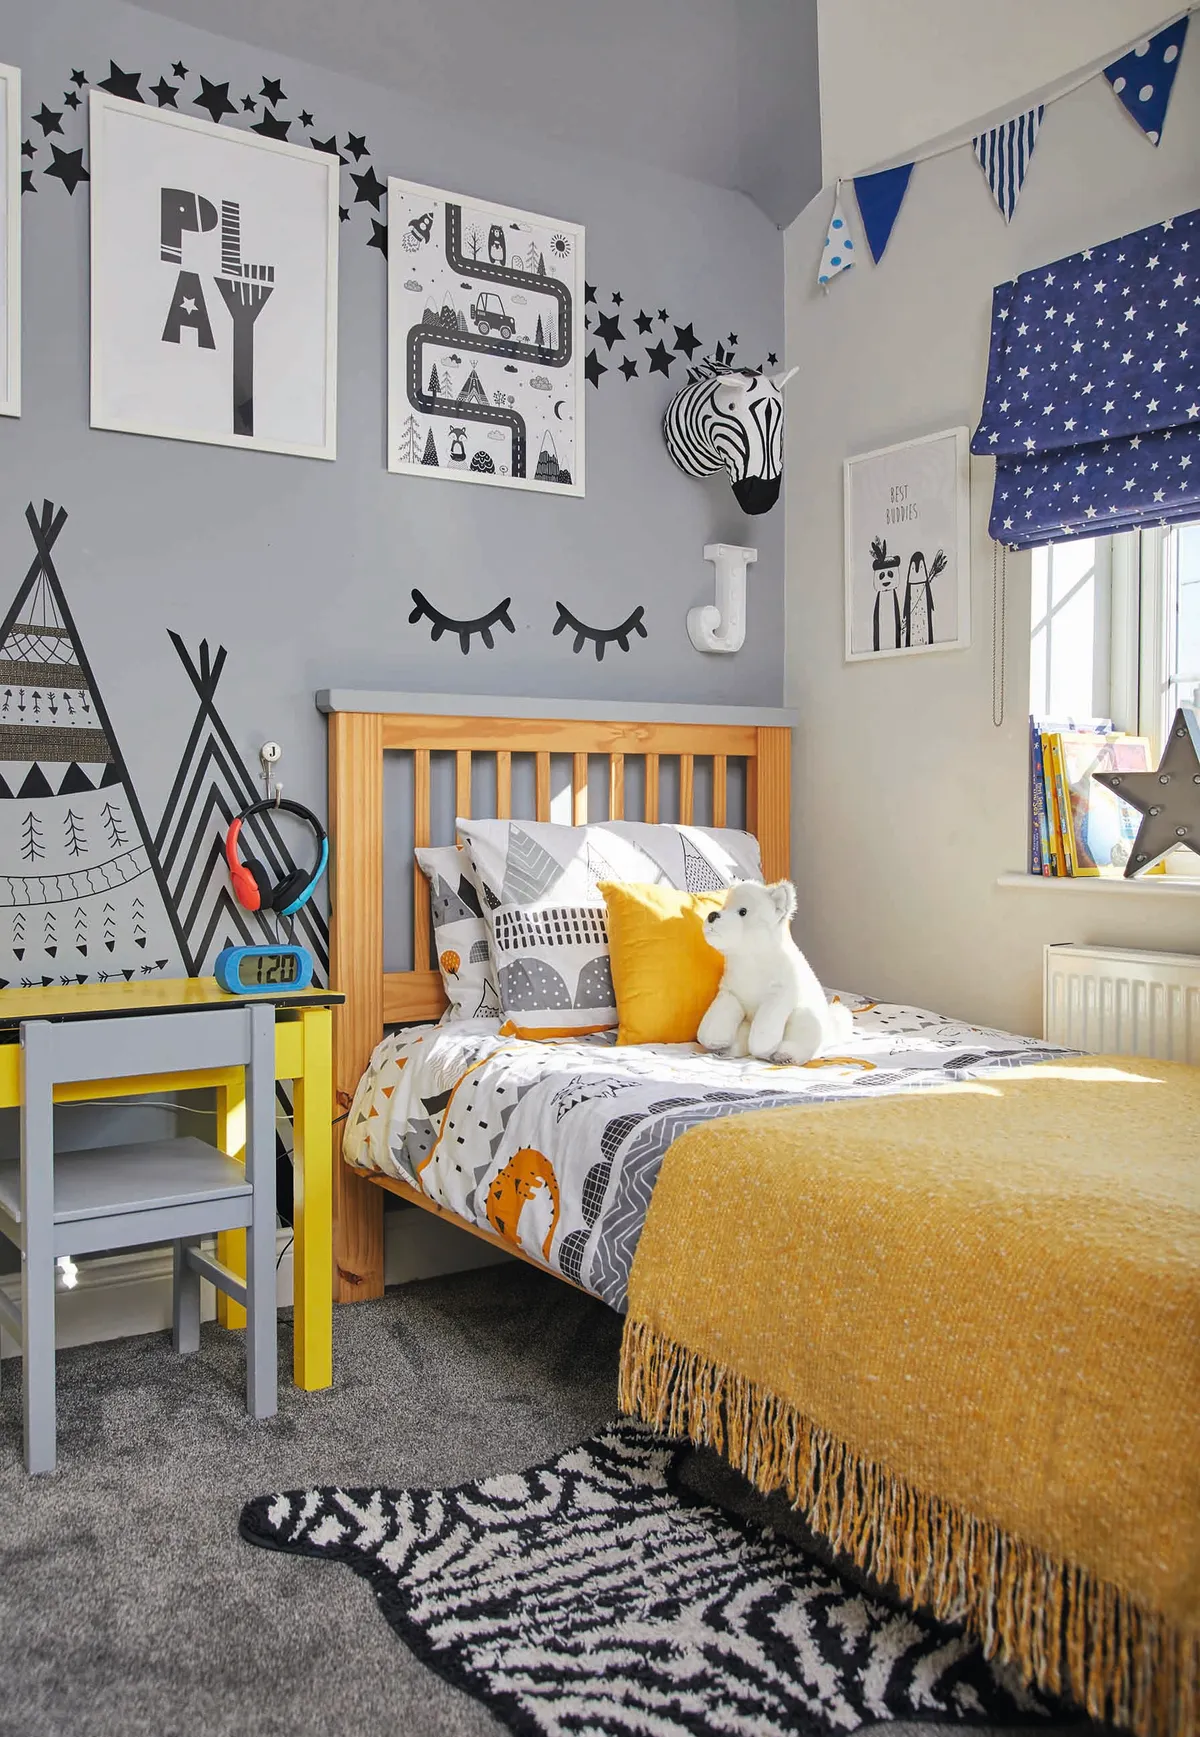 This kid's room has a yellow, blue and grey colour palette with prints on the wall from IKEA